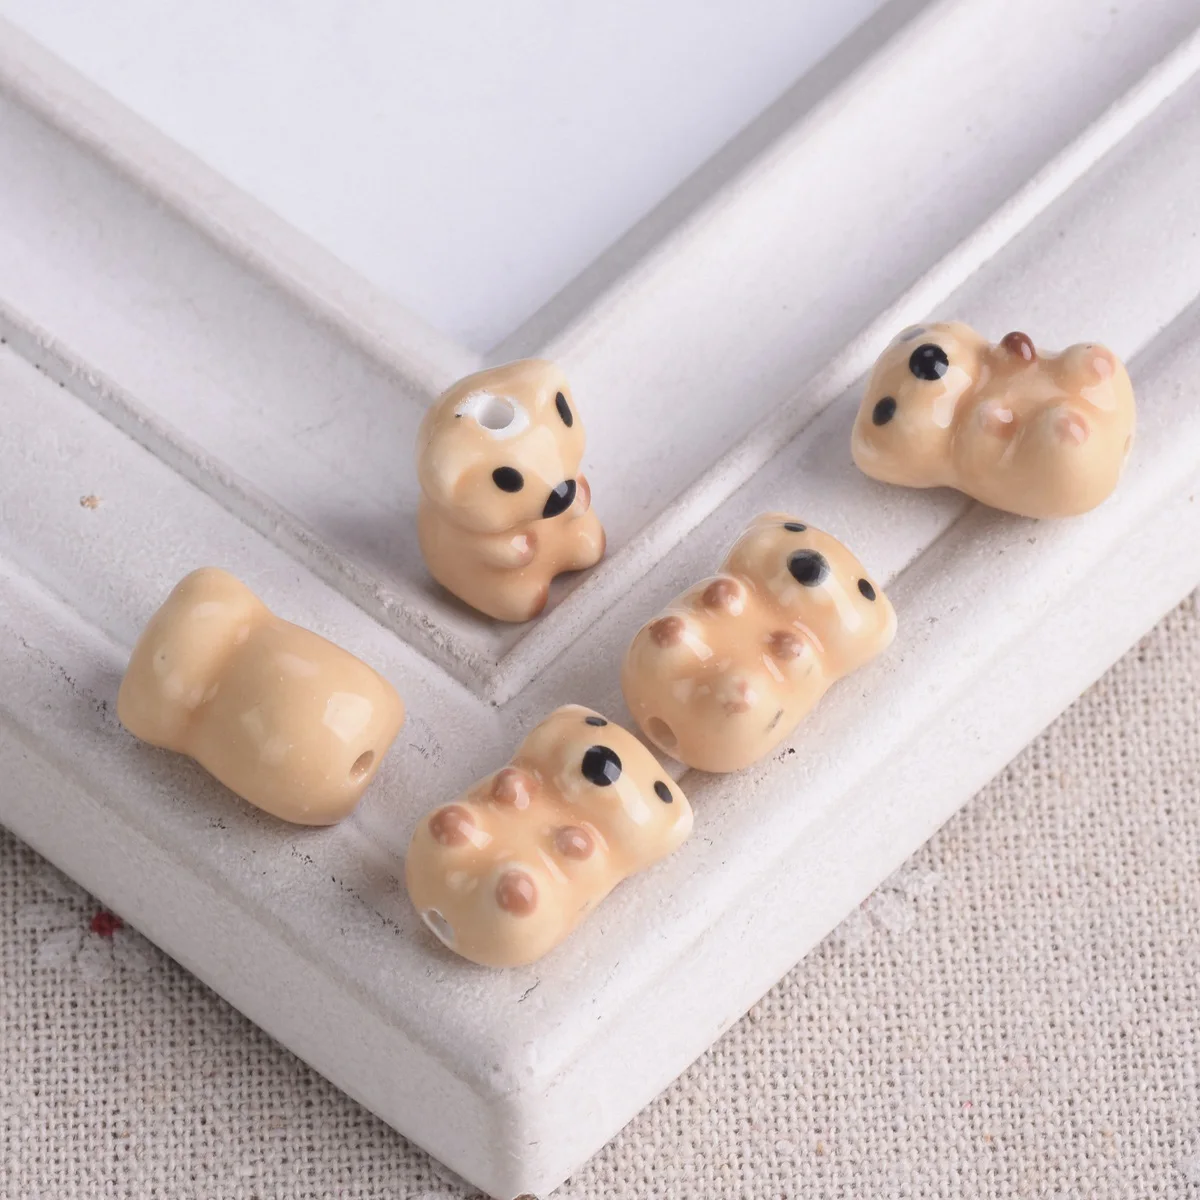 5pcs Brown Bear Shape 17x11mm Ceramic Porcelain Loose Beads For Jewelry Making DIY Craft Finndings diy crystal silicone mold pendant key chain defense toy uv resin epoxy mold handmade craft jewelry making accessaries